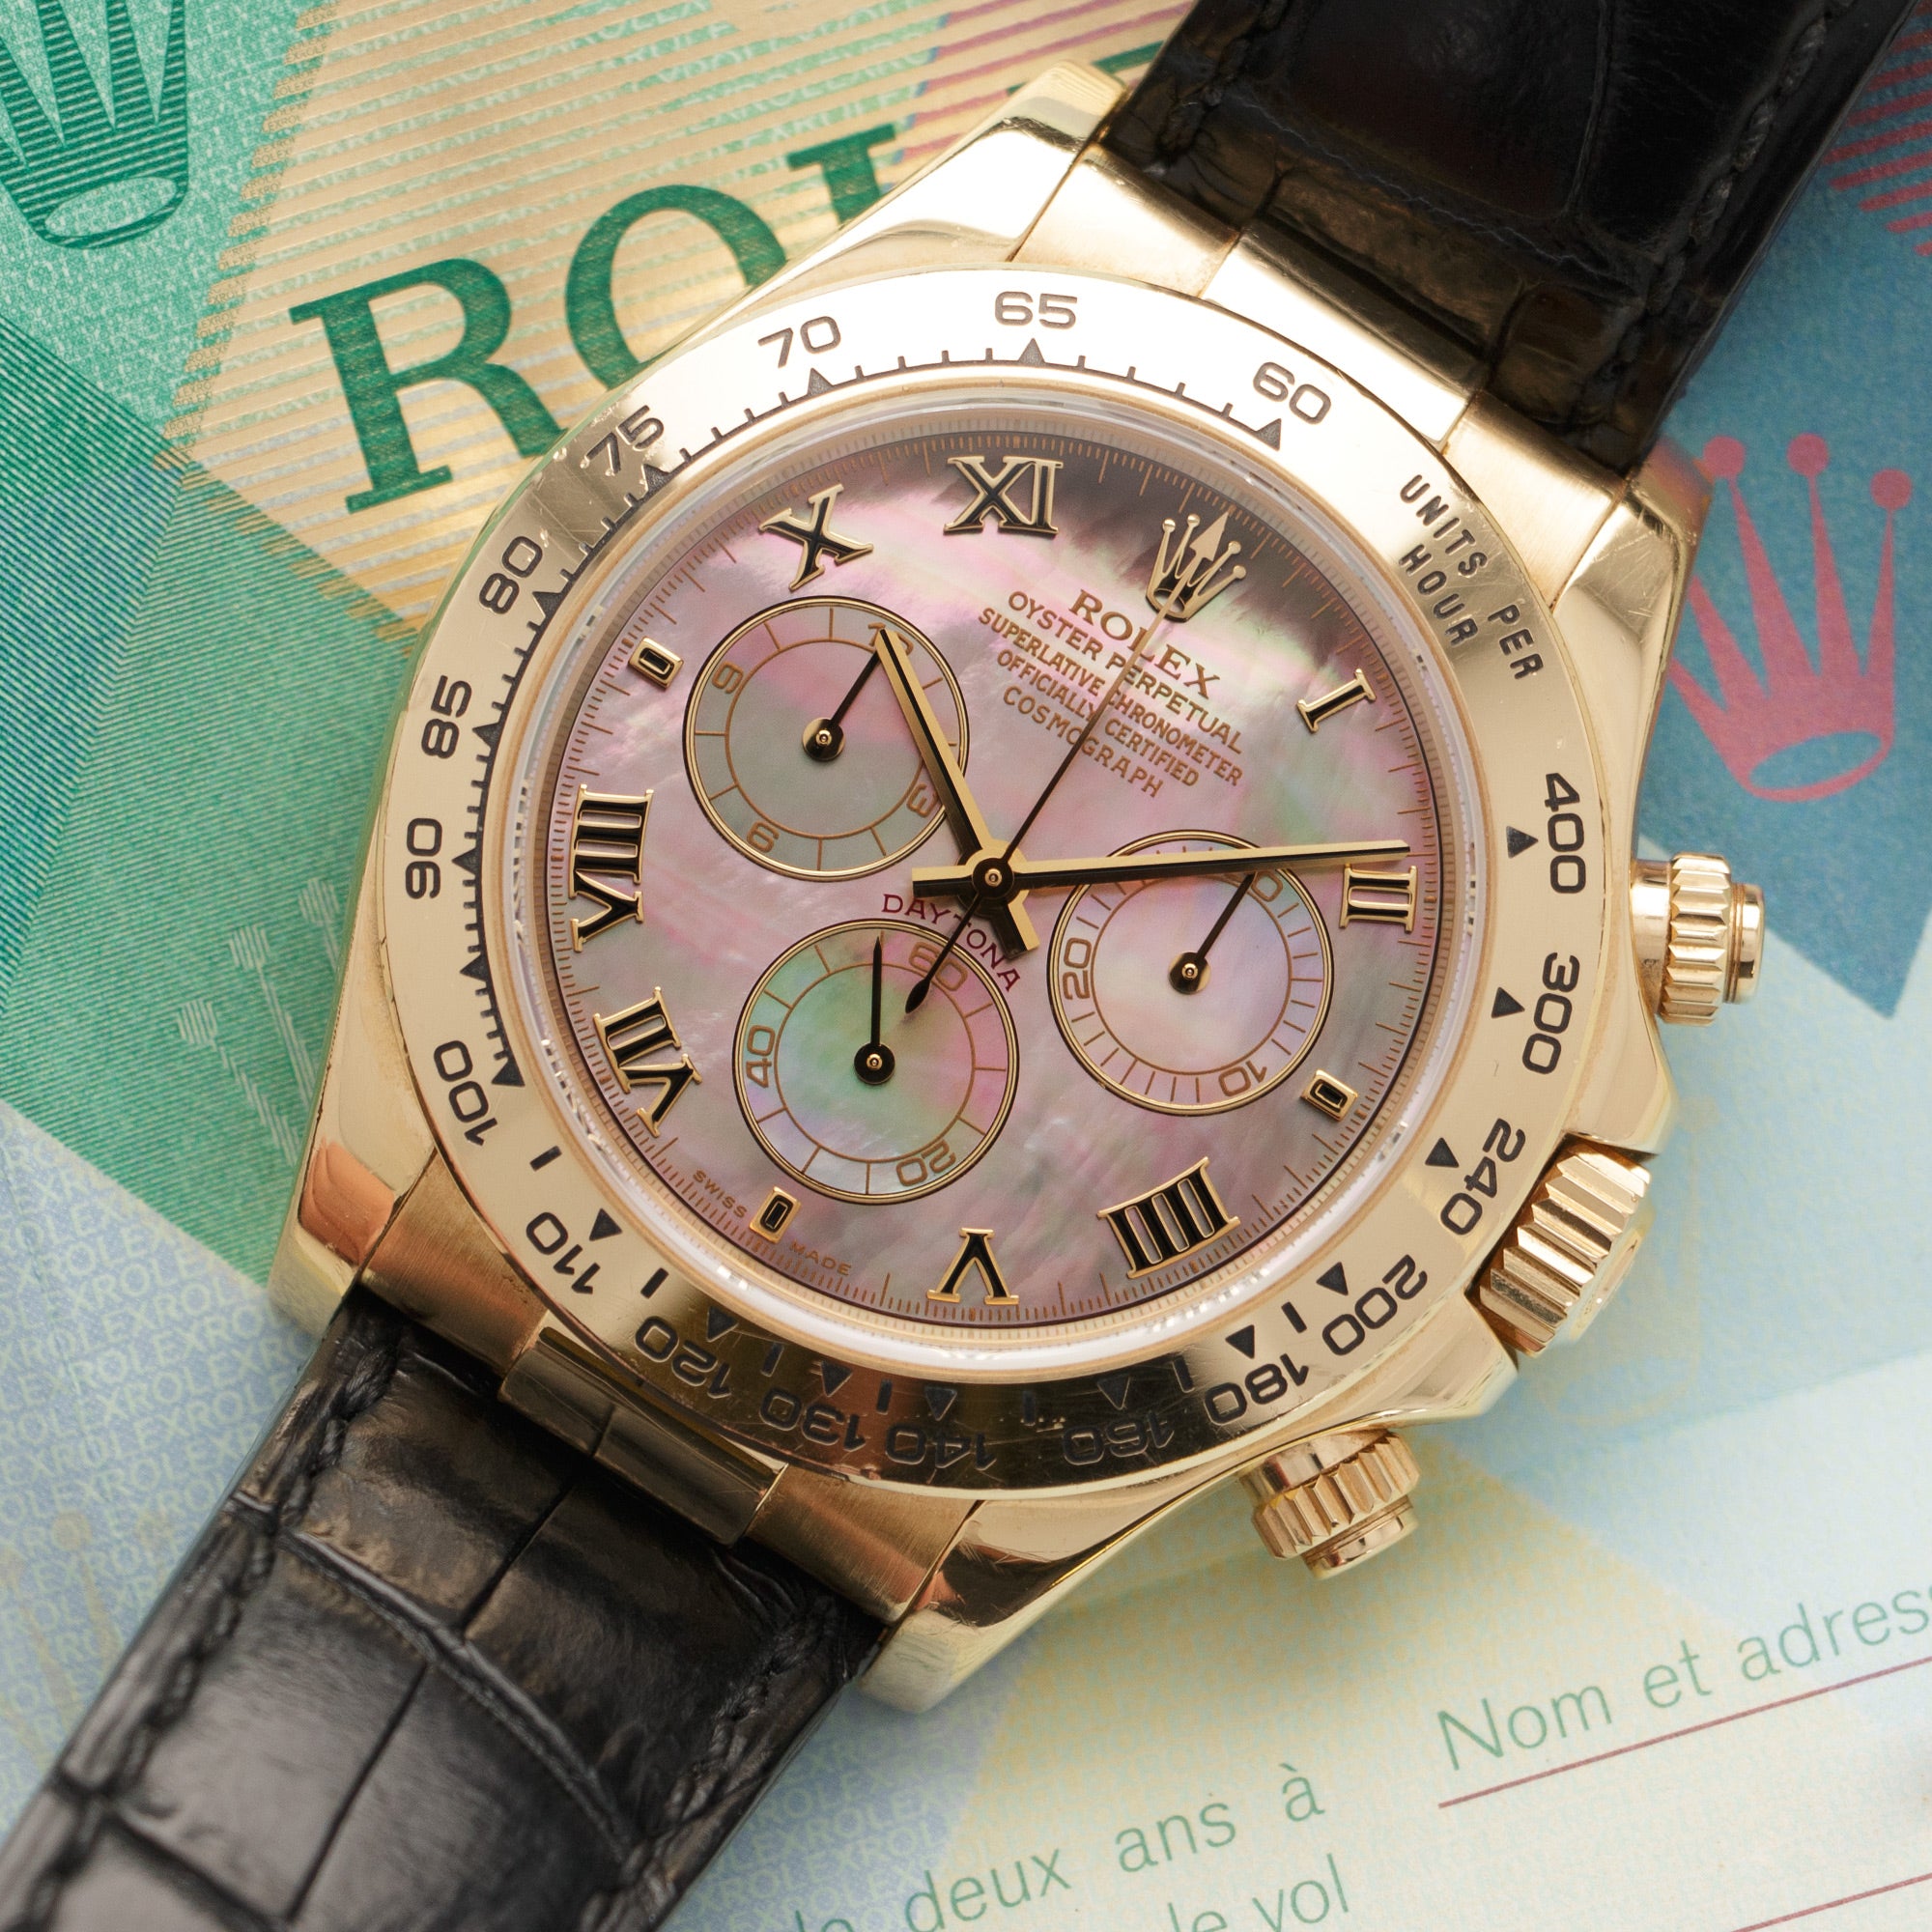 Rolex - Rolex Yellow Gold Cosmograph Daytona Mother of Pearl Watch Ref. 116518 - The Keystone Watches